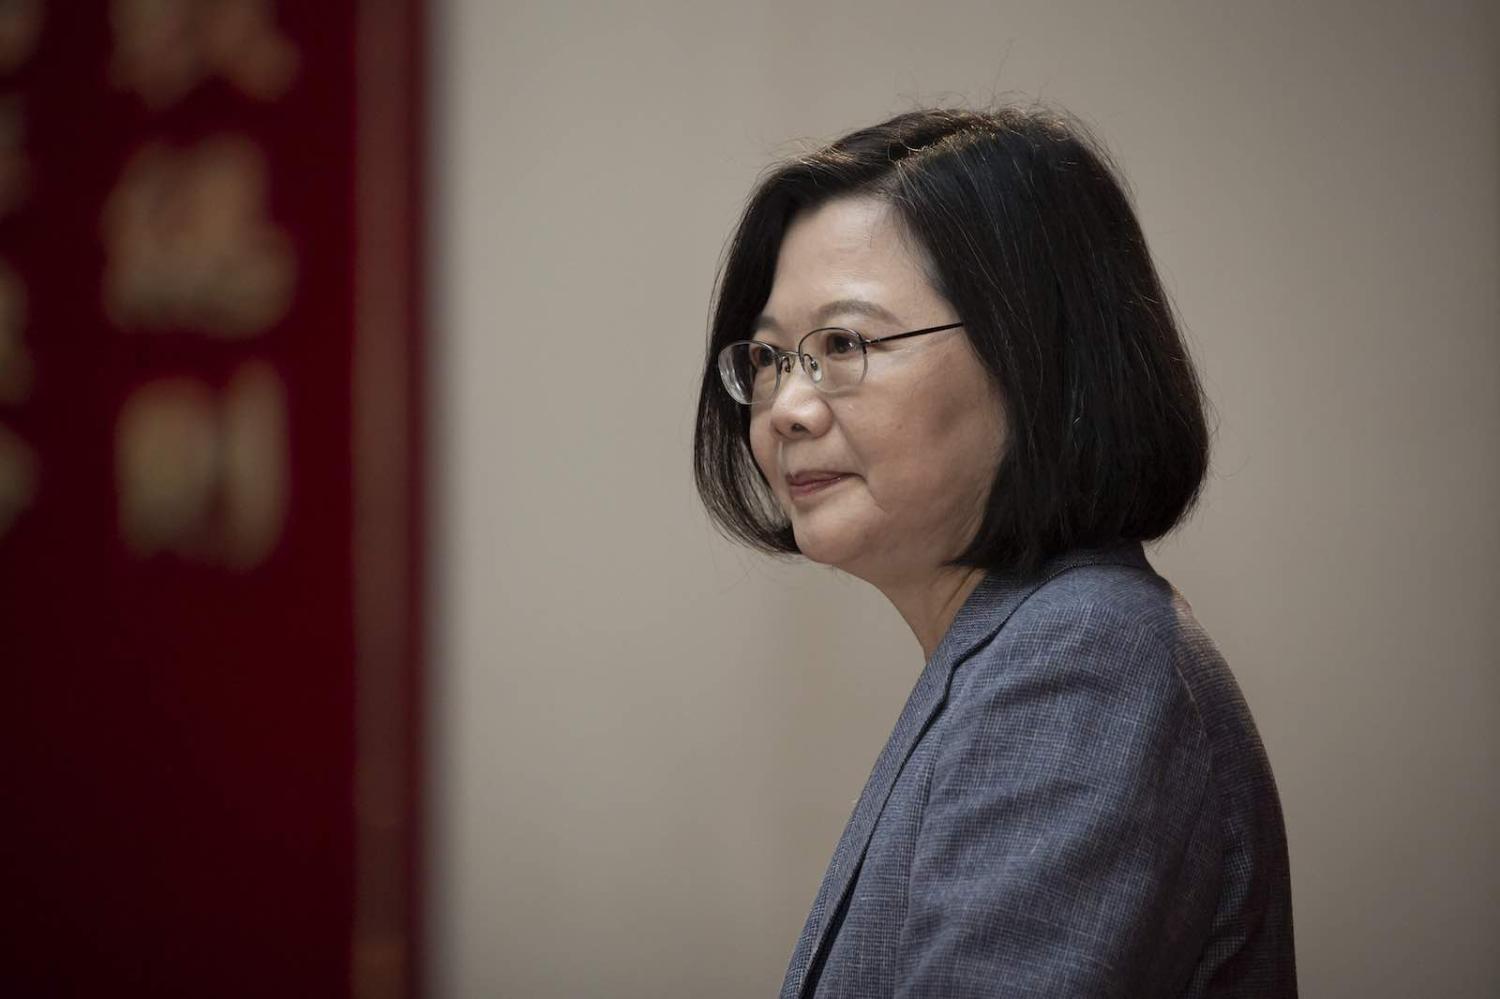 Tsai Ing-wen has taken a prudent and cautious stance on cross-strait issues (Taiwan Presidential Office/Flickr)